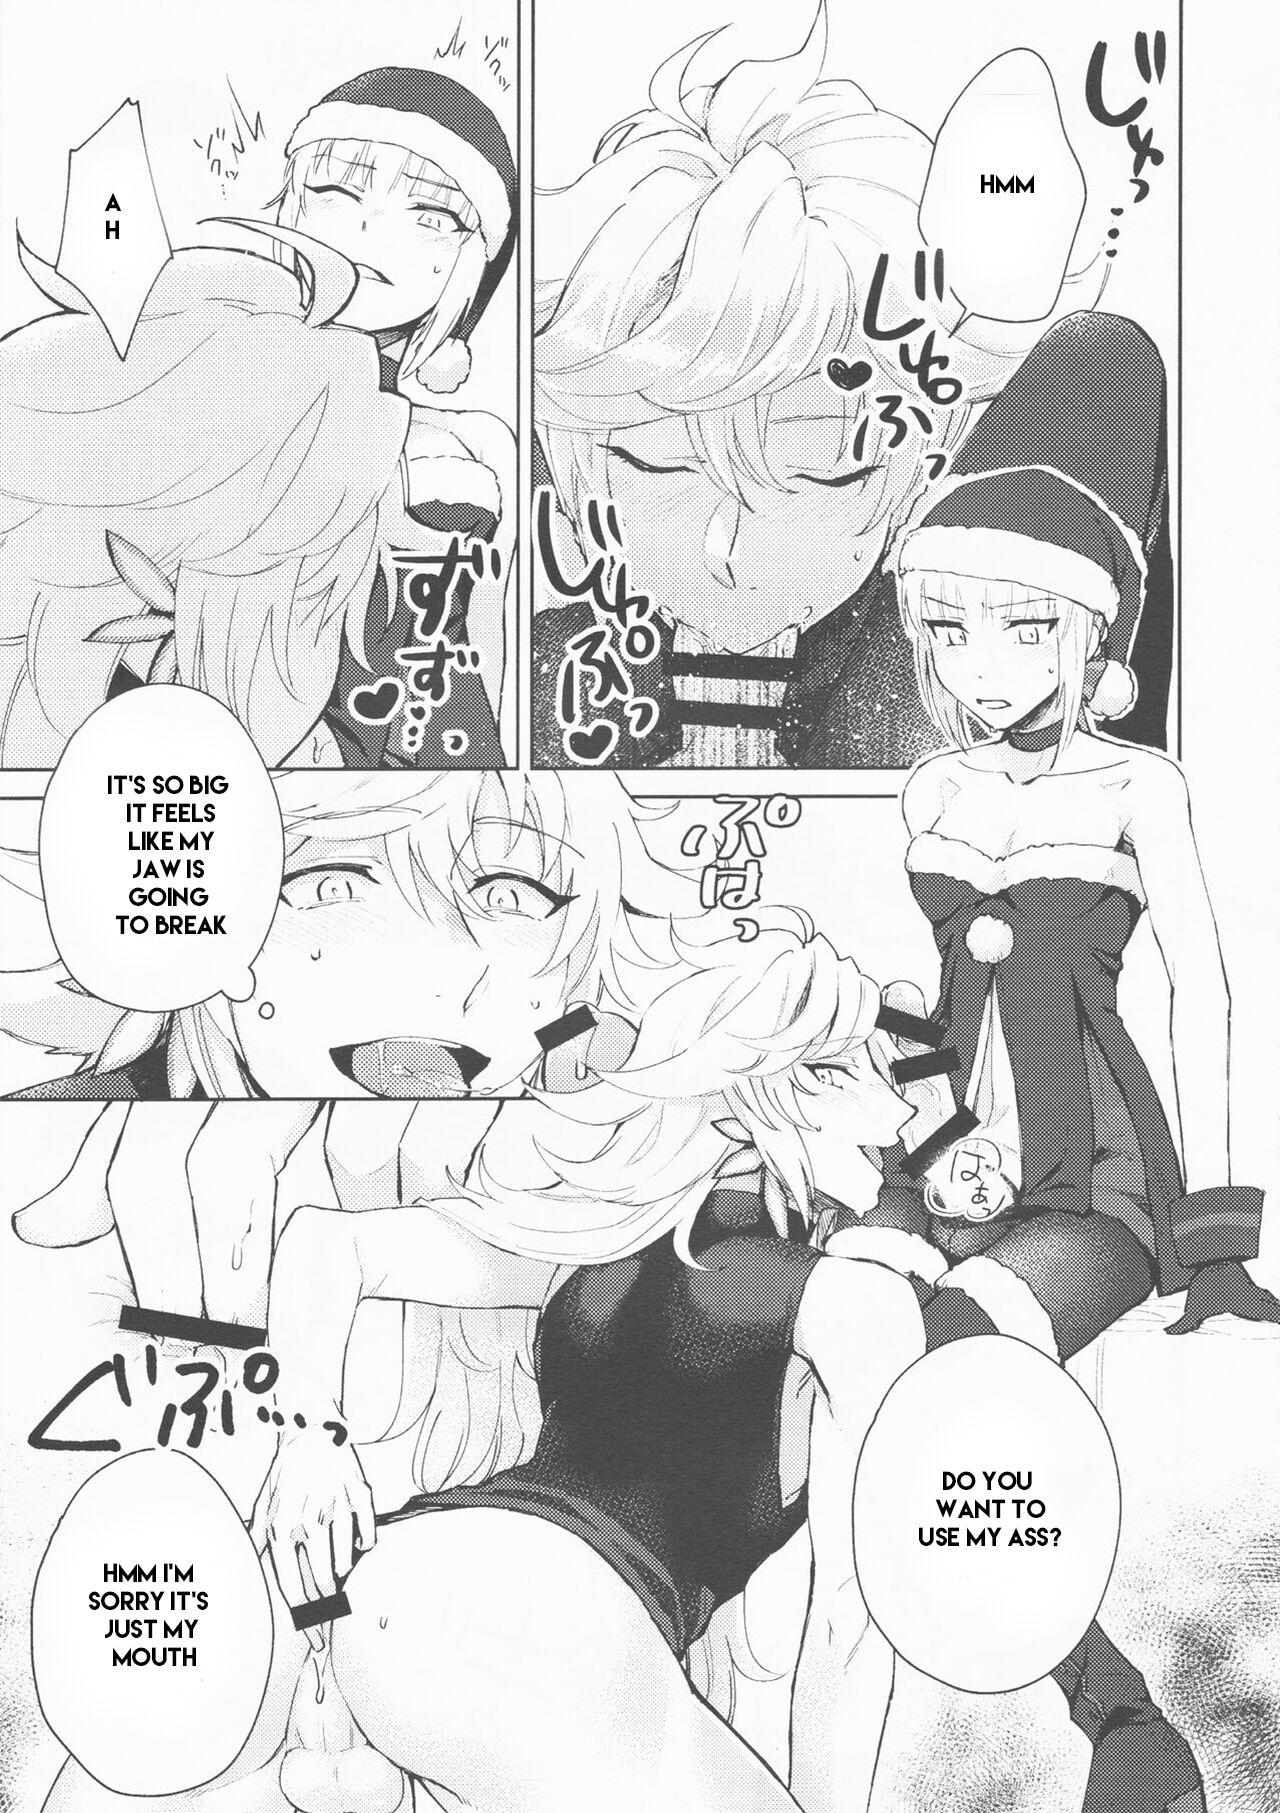 Pussyeating (Hazama)] Hero Milking (FateGrand Order) part 1 machine translated - Fate grand order Fuck - Page 7